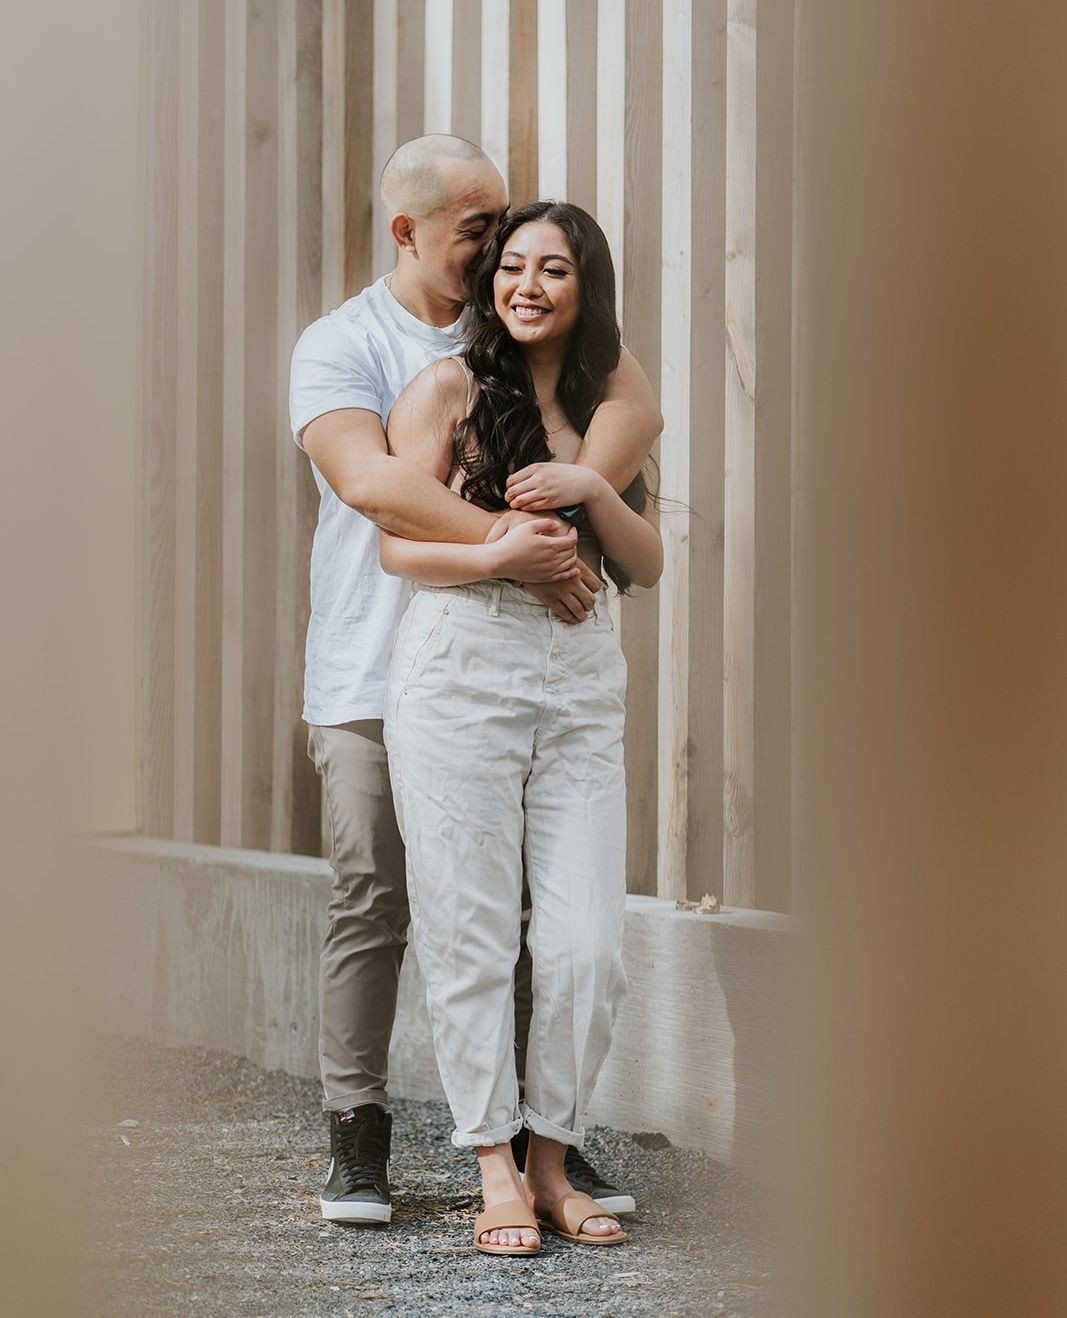 Sharing more from Phil &amp; Mawen's cute session ❤️. You'd never be able to tell that they were shy to being with! ⁠
⁠
These two are also having their wedding social coming up just around the corner! Shoot me a message if you want to get some ticket